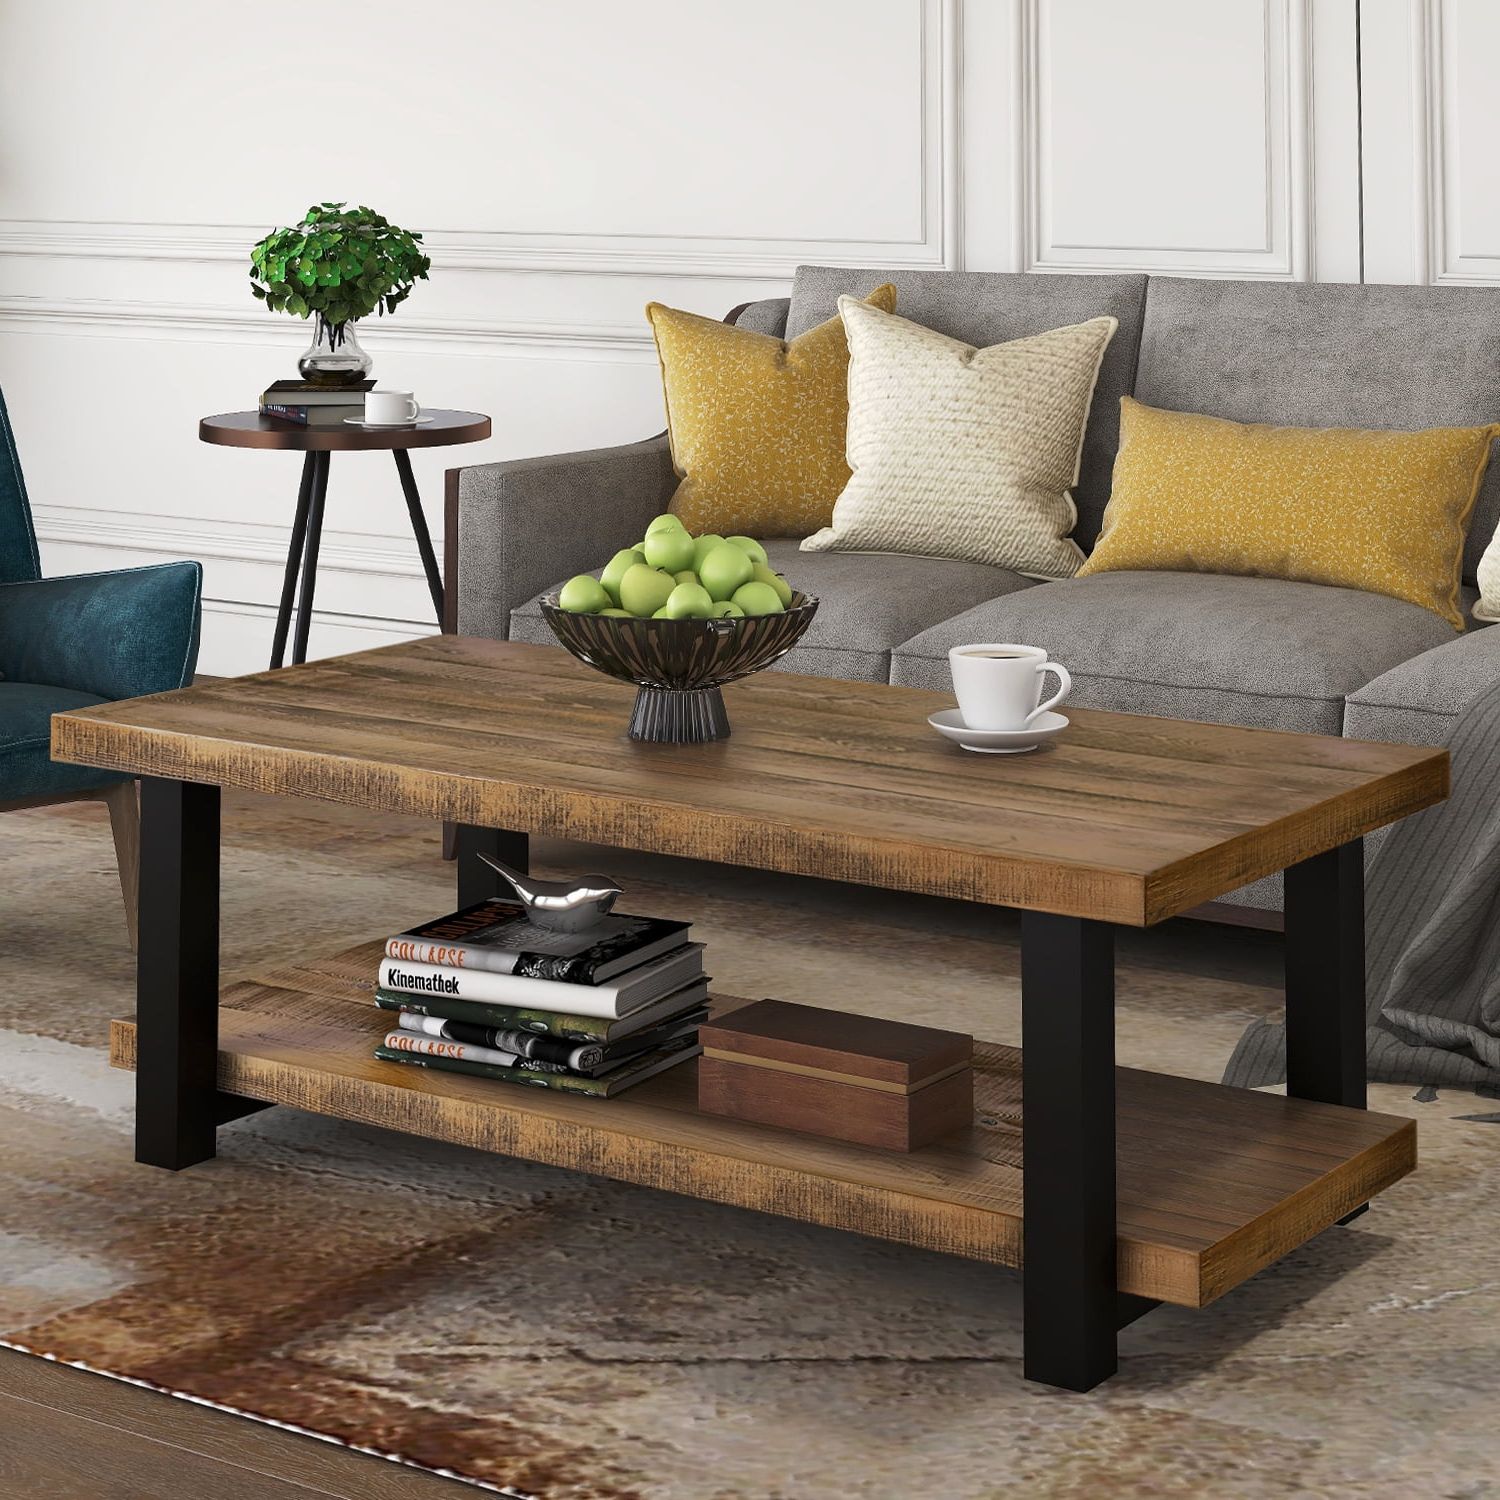 Topcobe Rustic Natural Coffee Table With Storage Shelf, Side End Table Intended For Well Known Rectangular Coffee Tables With Pedestal Bases (View 2 of 15)